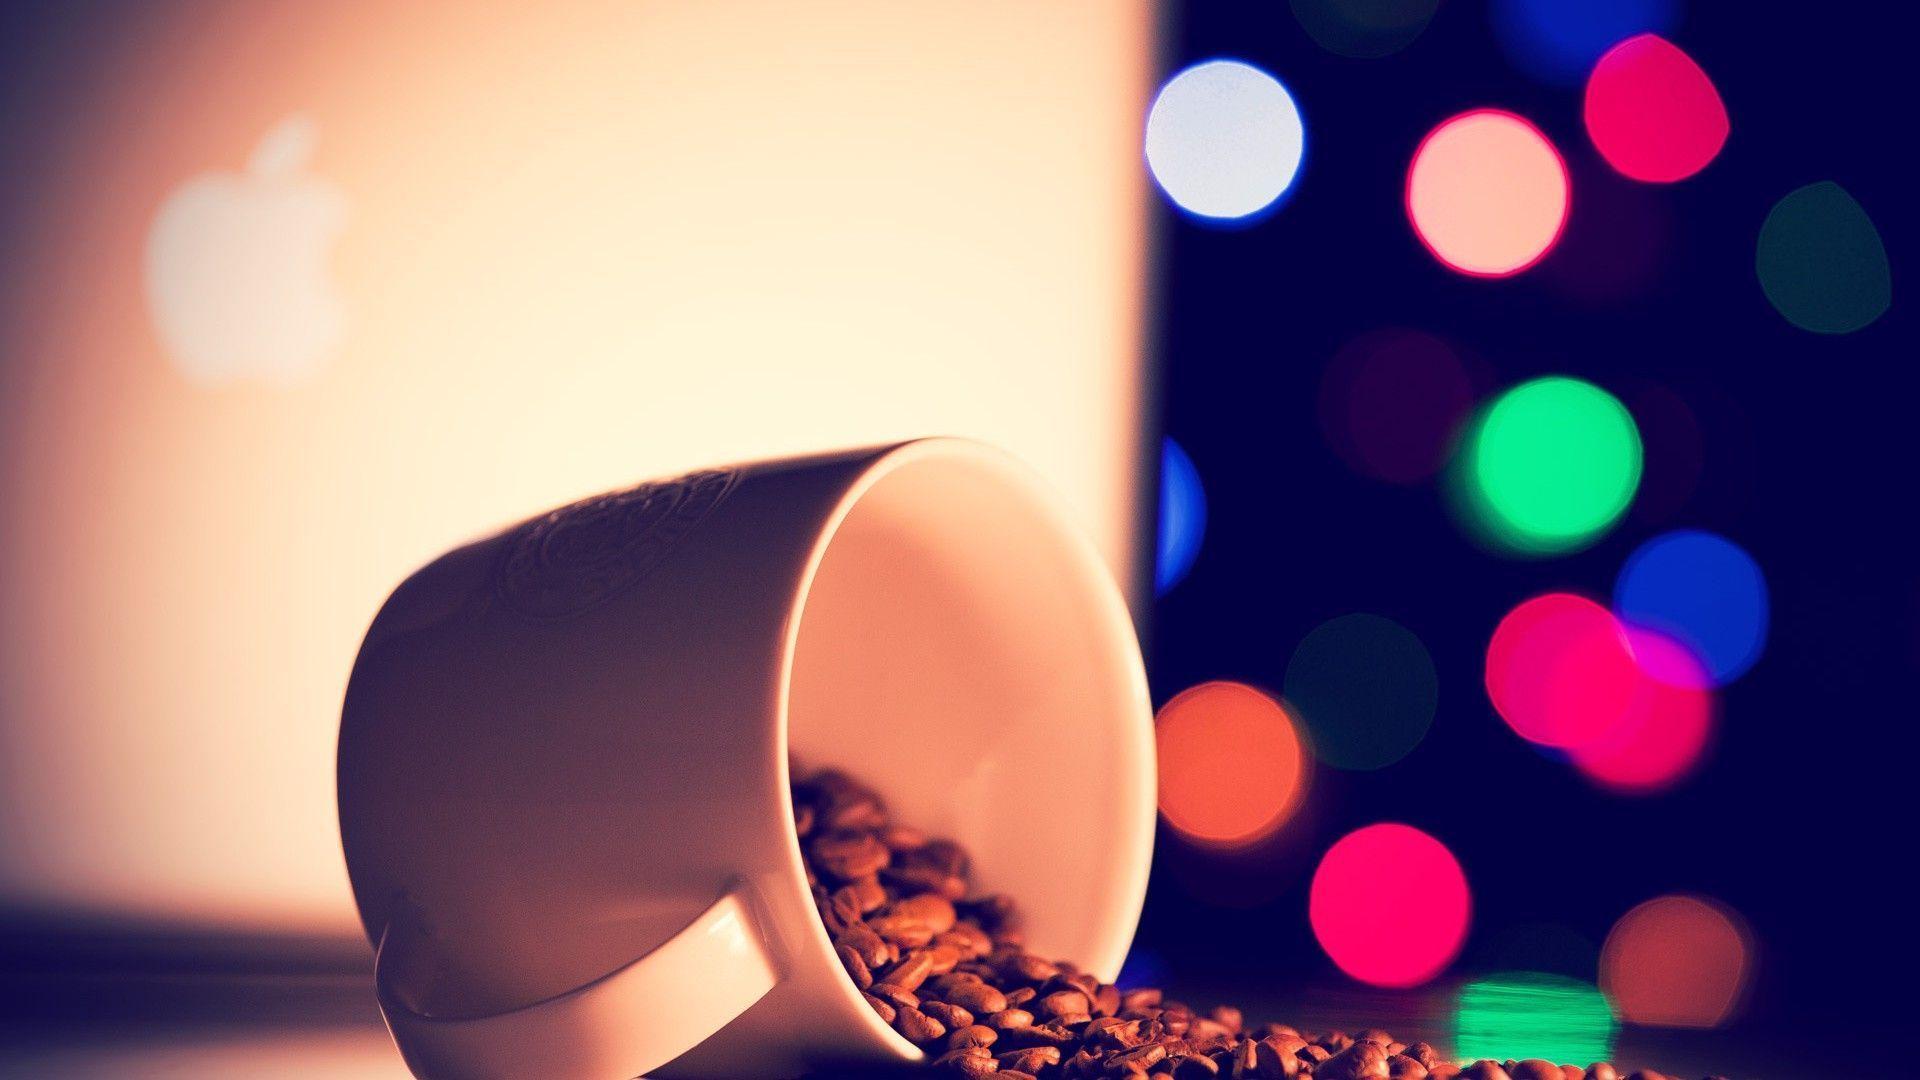 coffee cup HD desktop wallpaper download this wallpaper for free